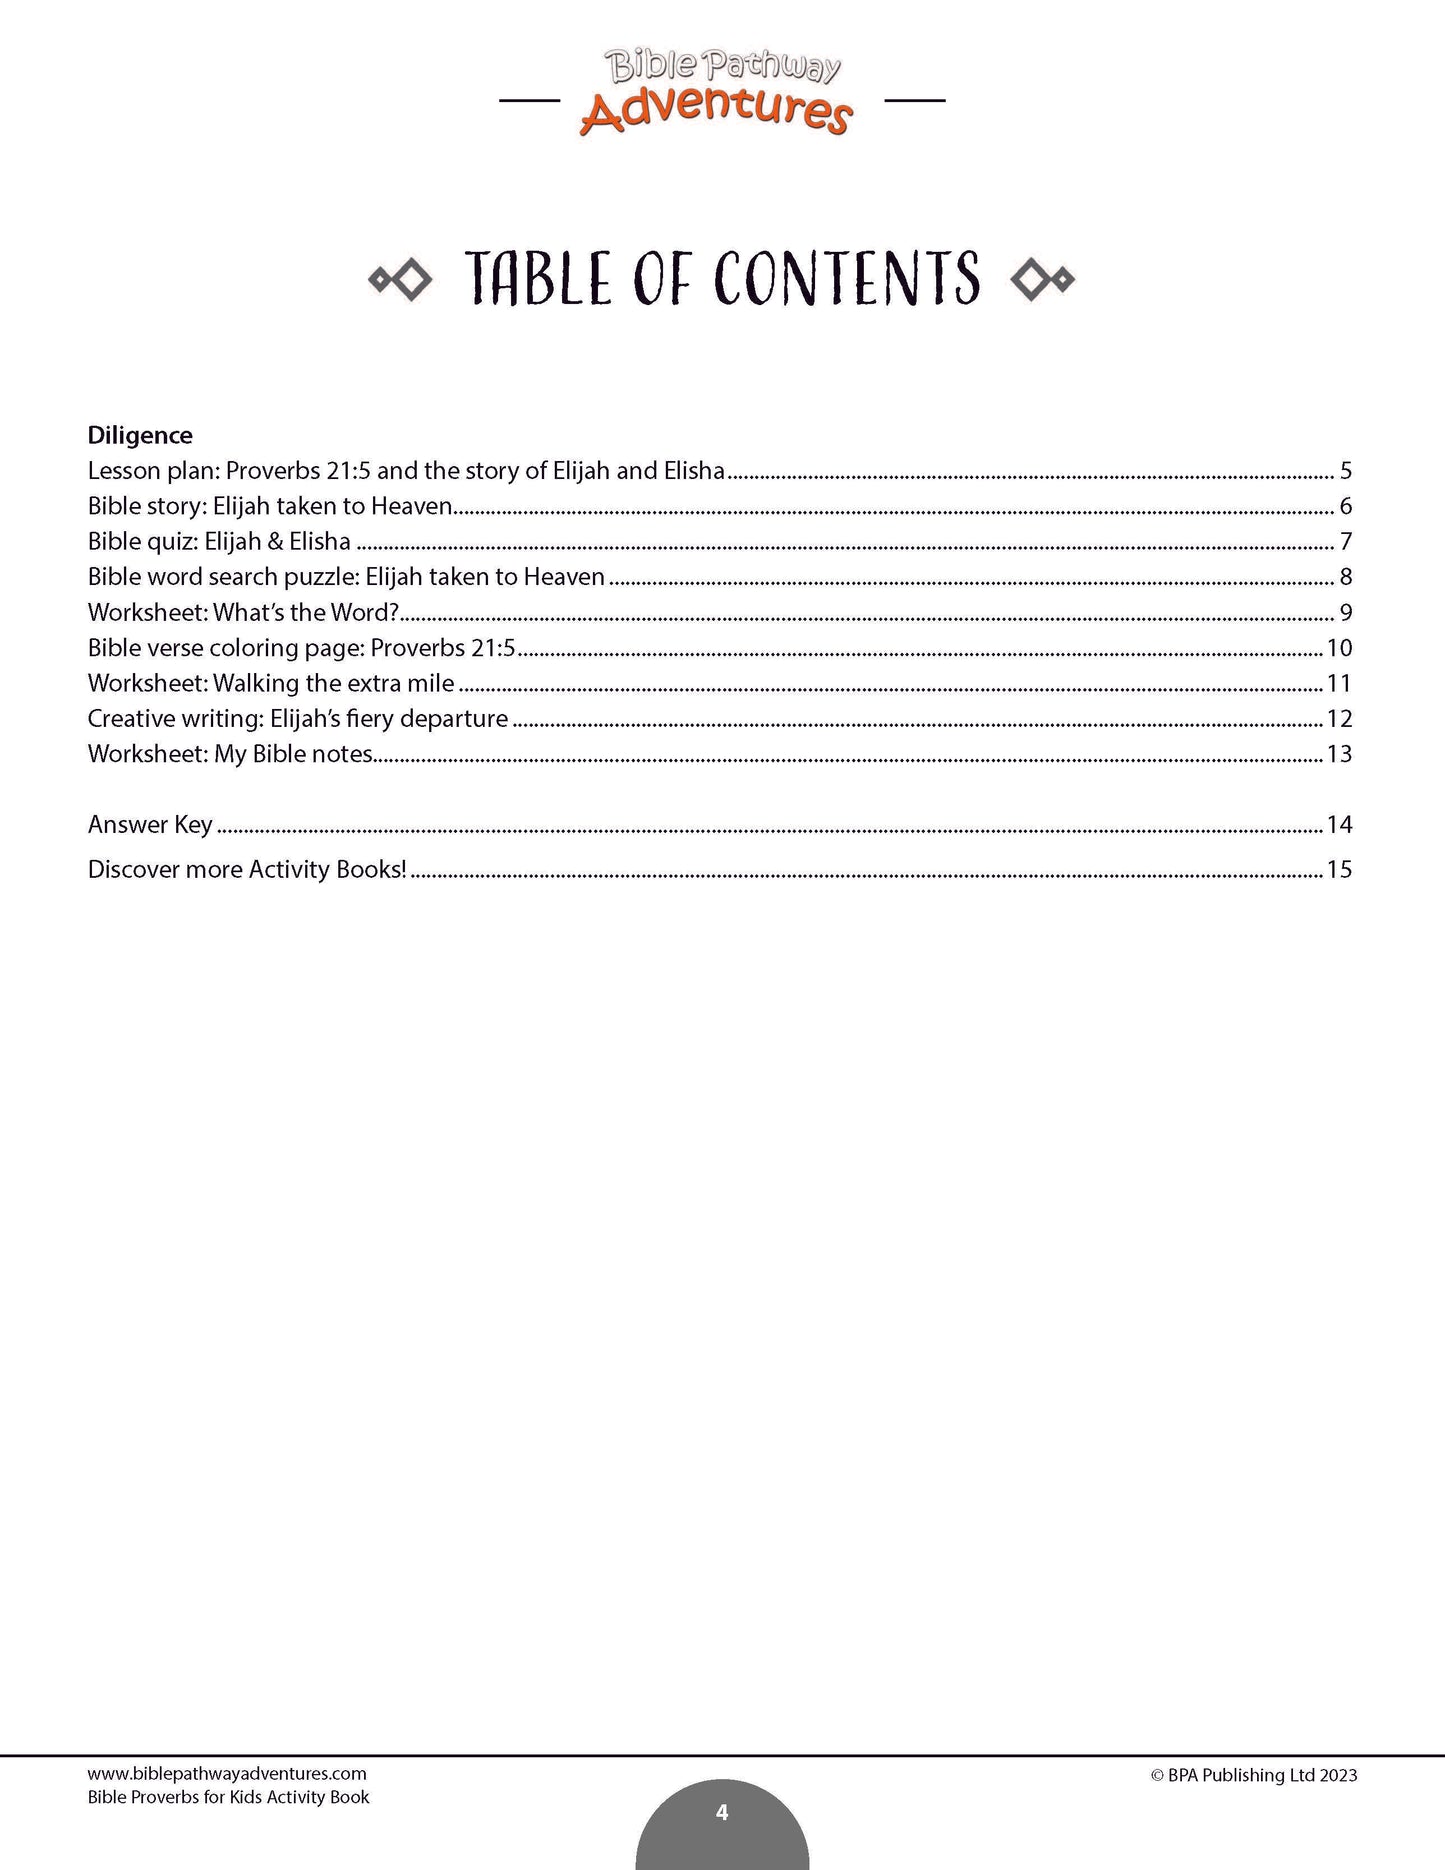 Diligence: Bible Activity Book for Kids